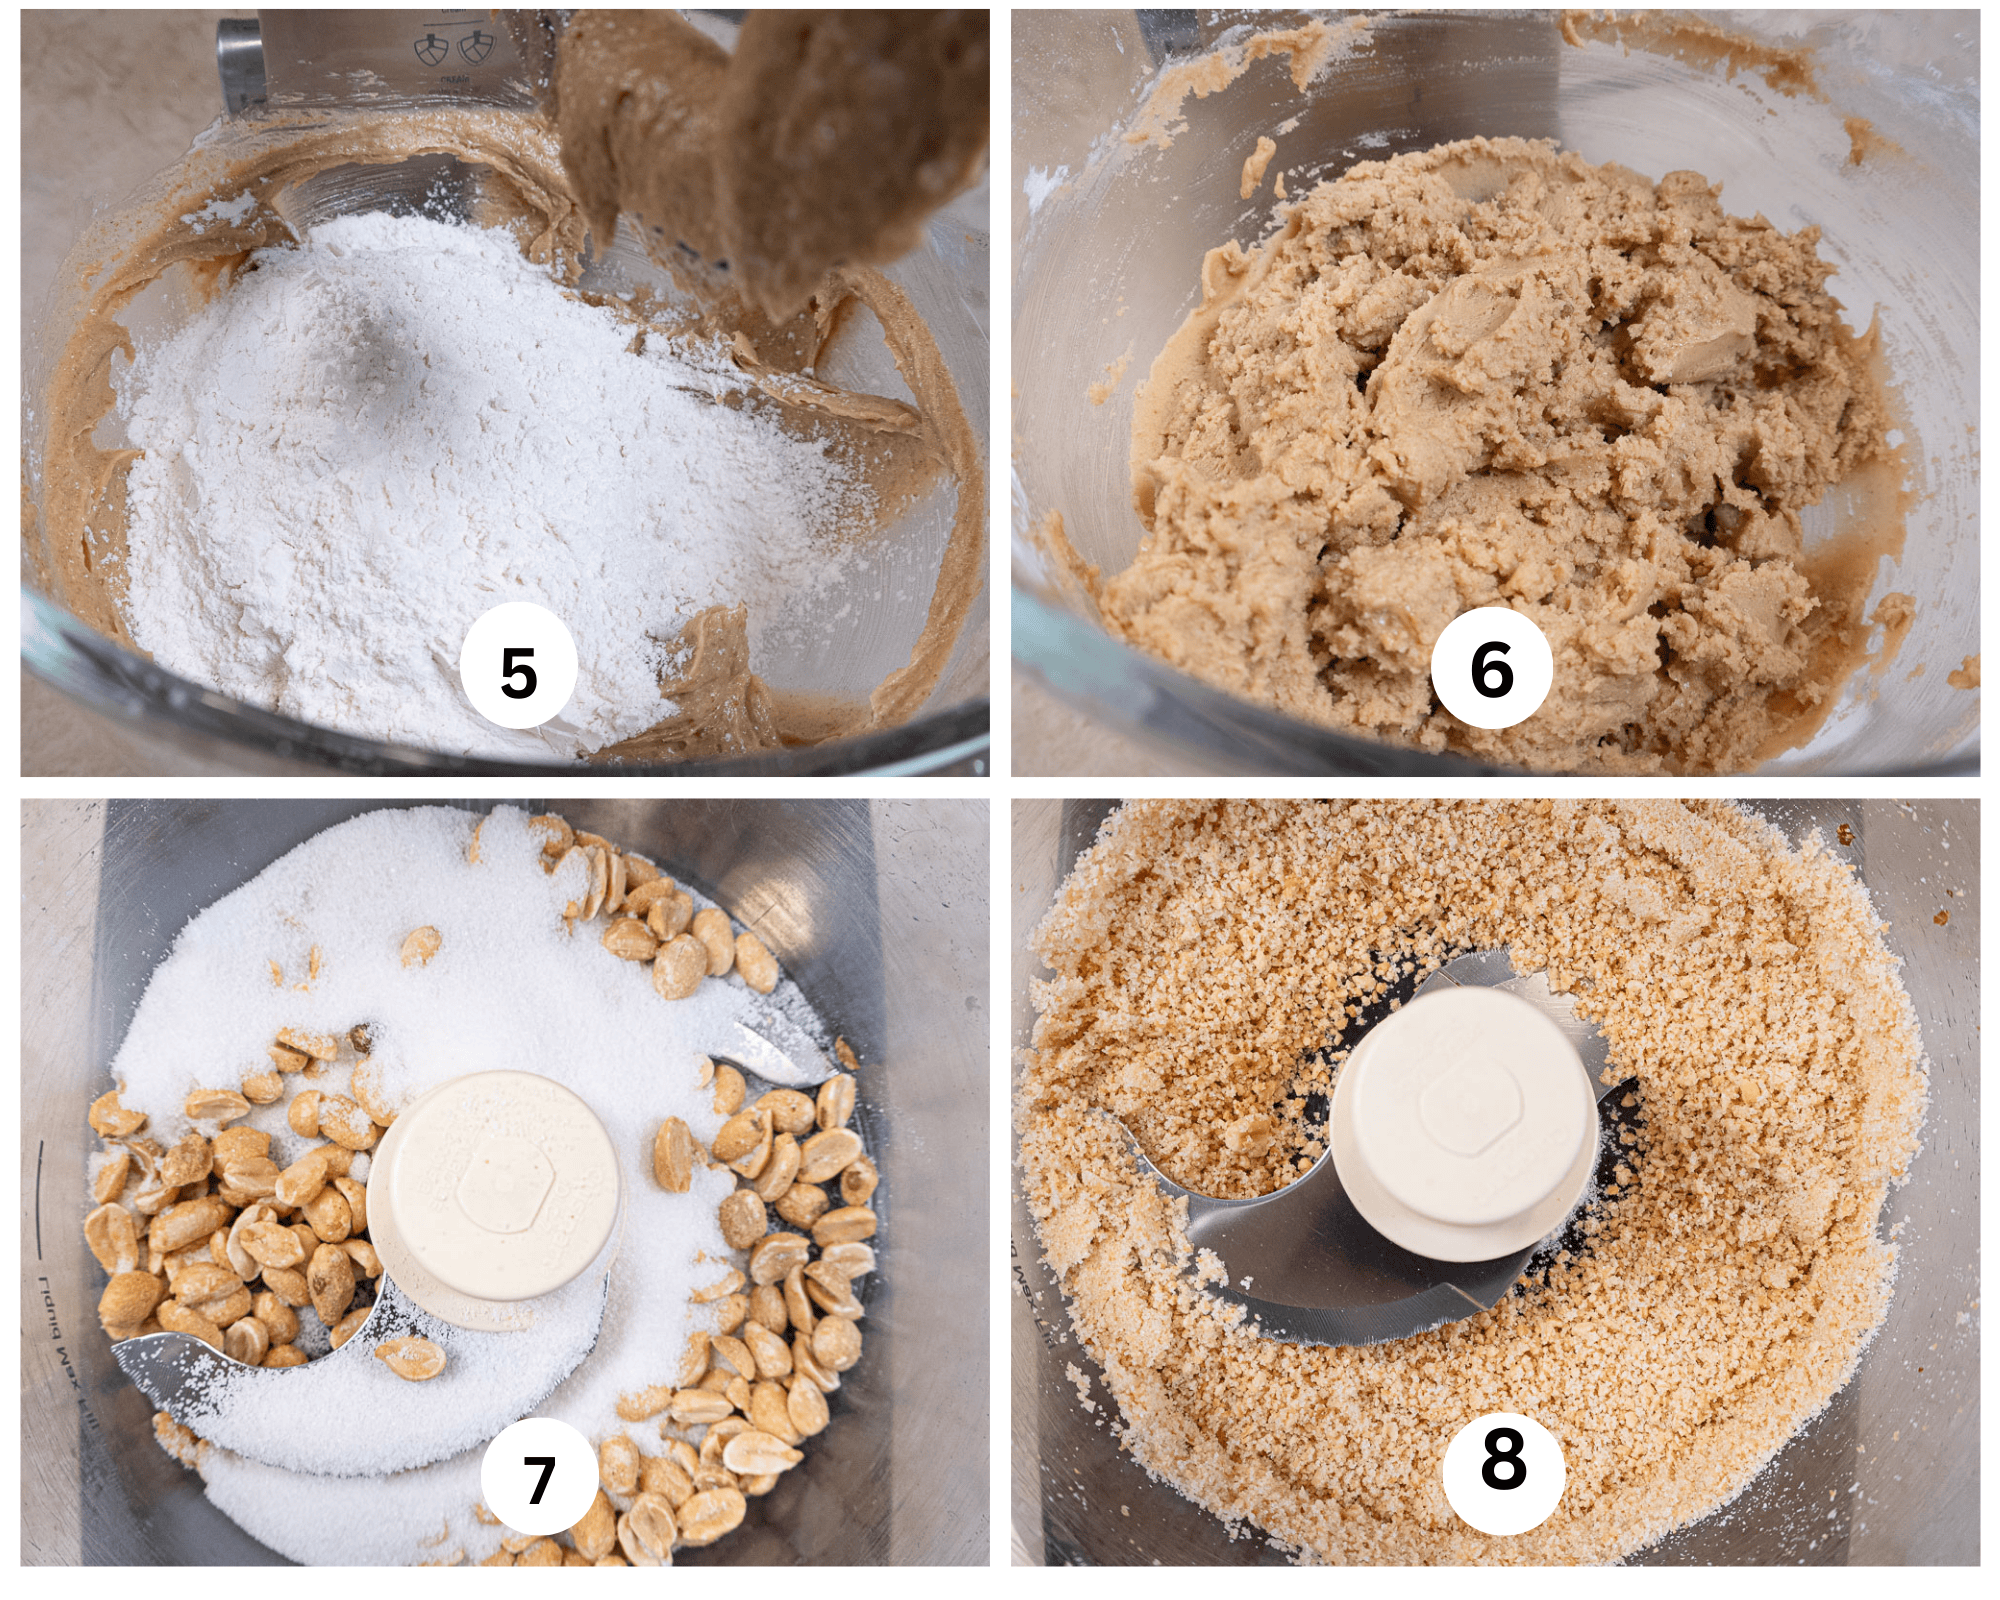 The second collage shows the flour added to the wet ingredients, the completed batter, peanuts and sugar in the processor bowl, then processed.  